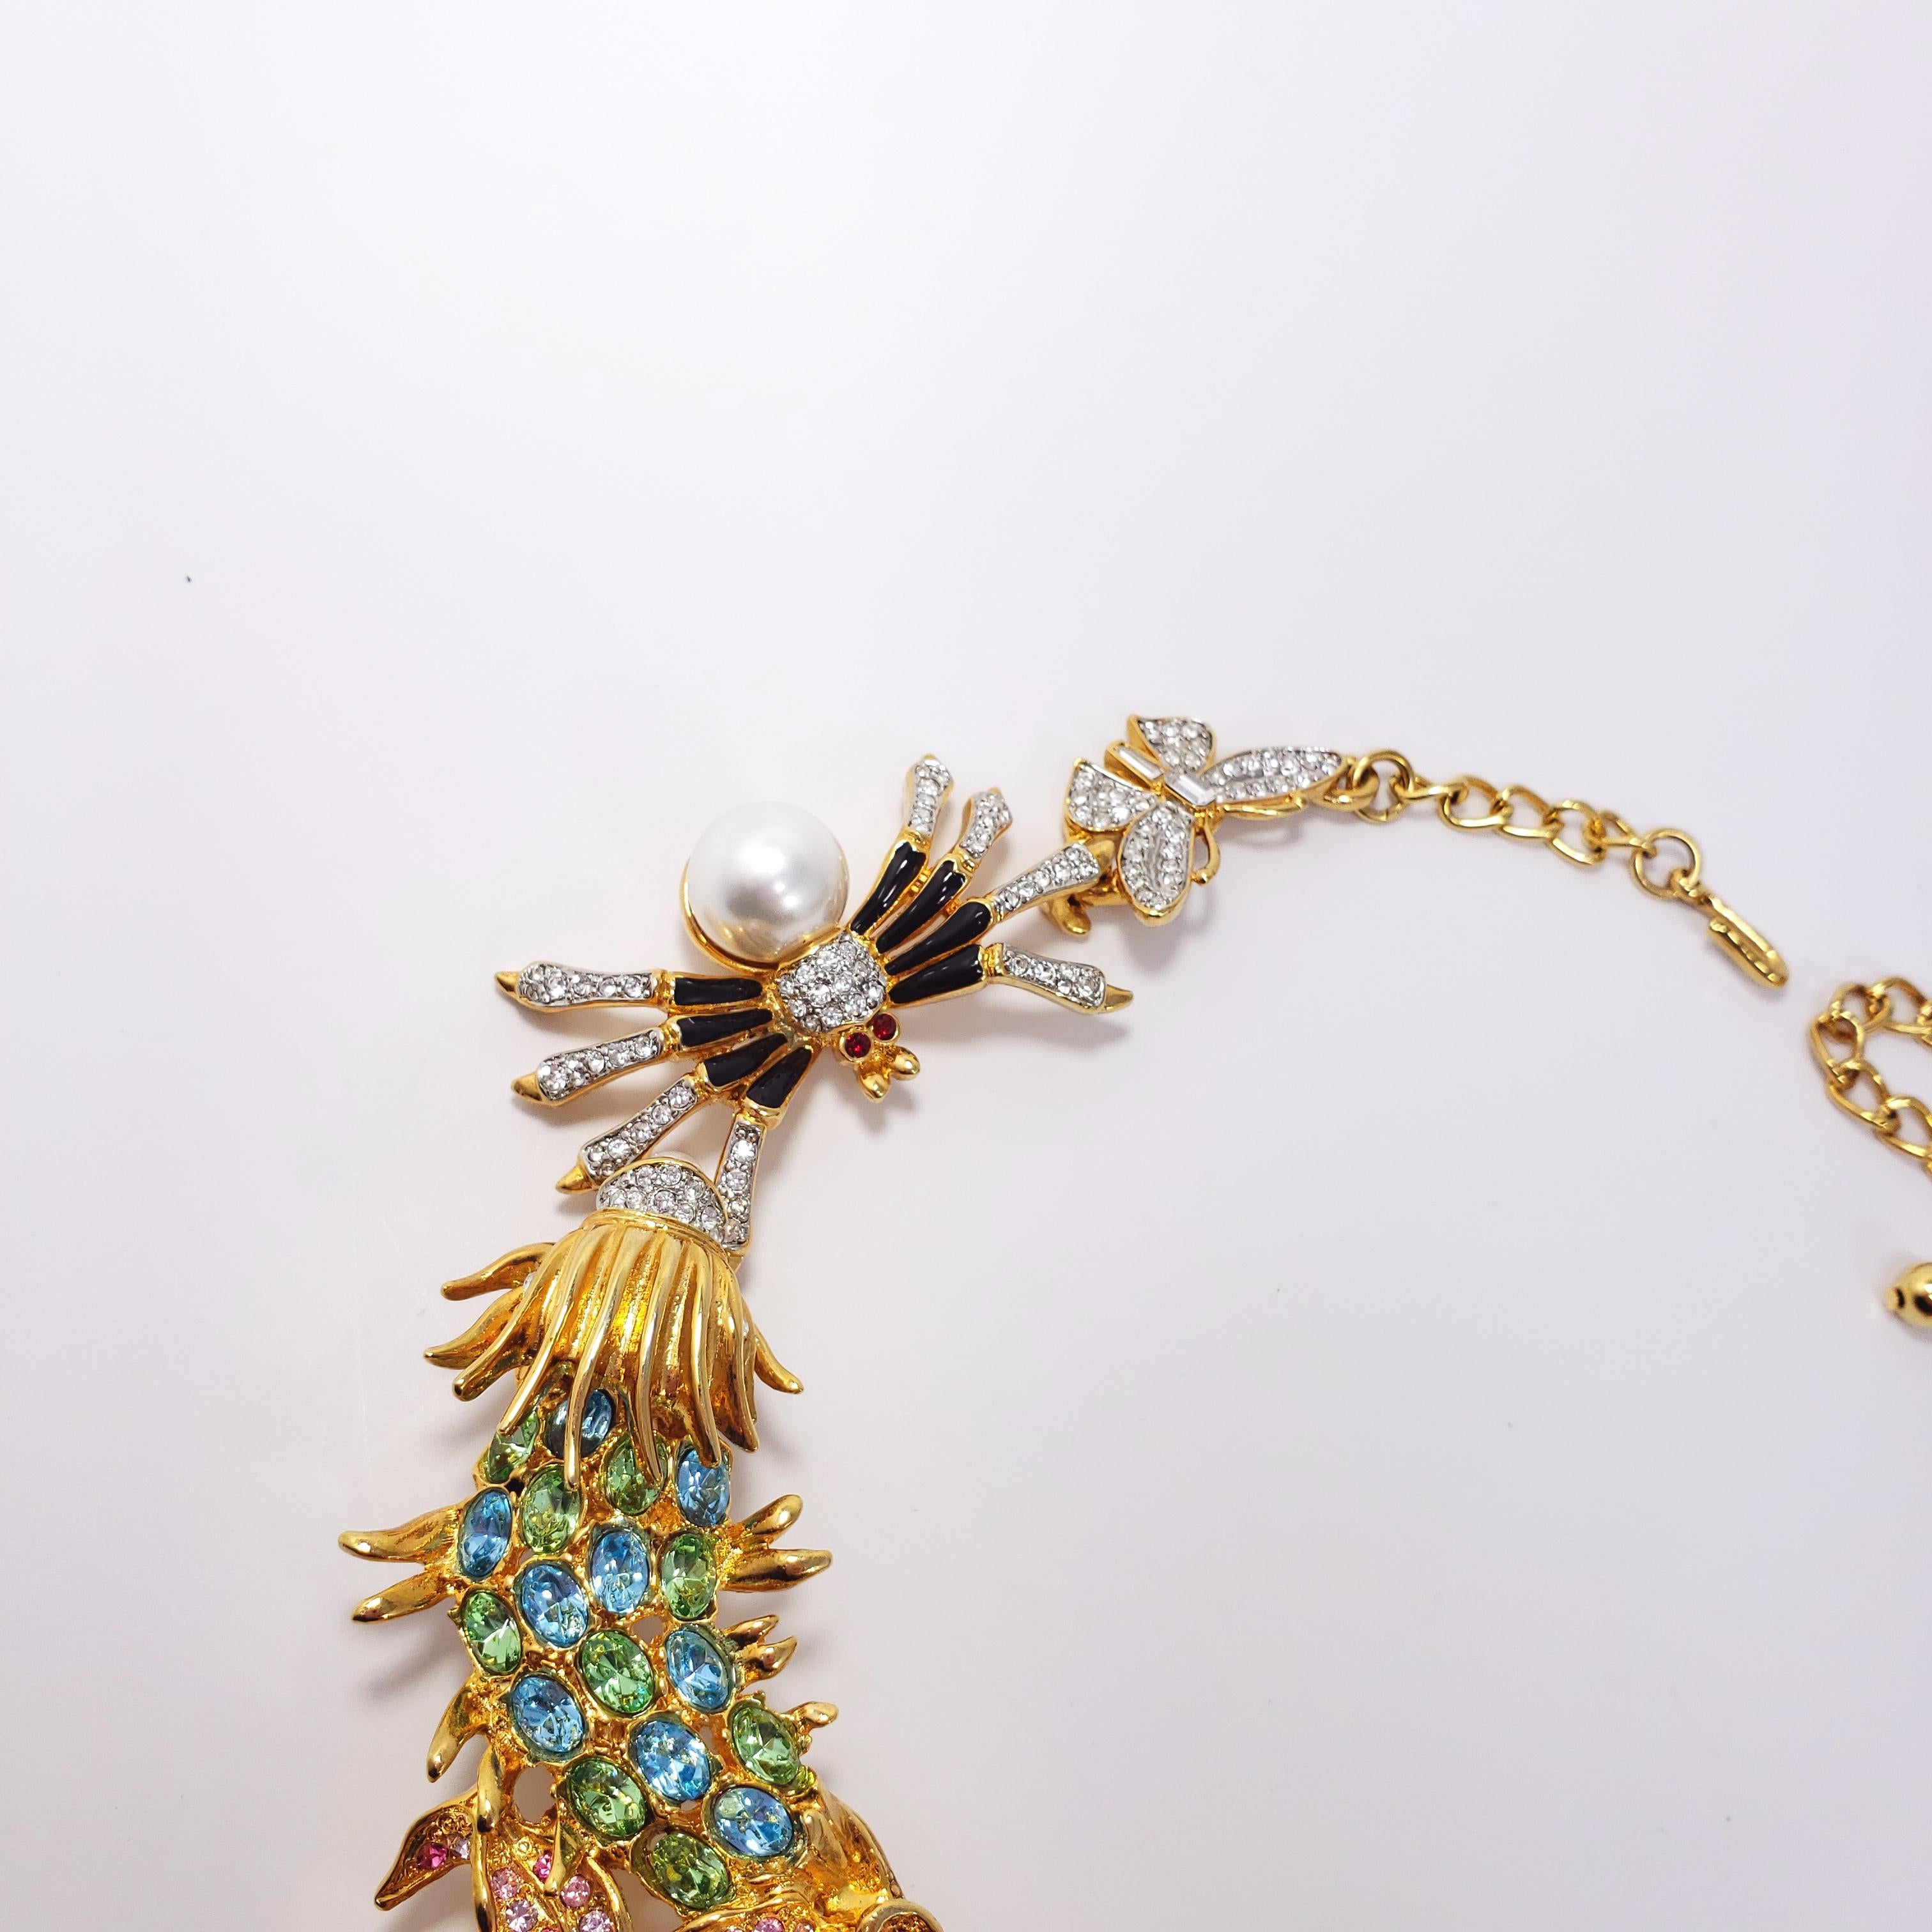 Kenneth Jay Lane Ornate Colorful Crystal Kaleidoscope Collar Necklace in Gold 2